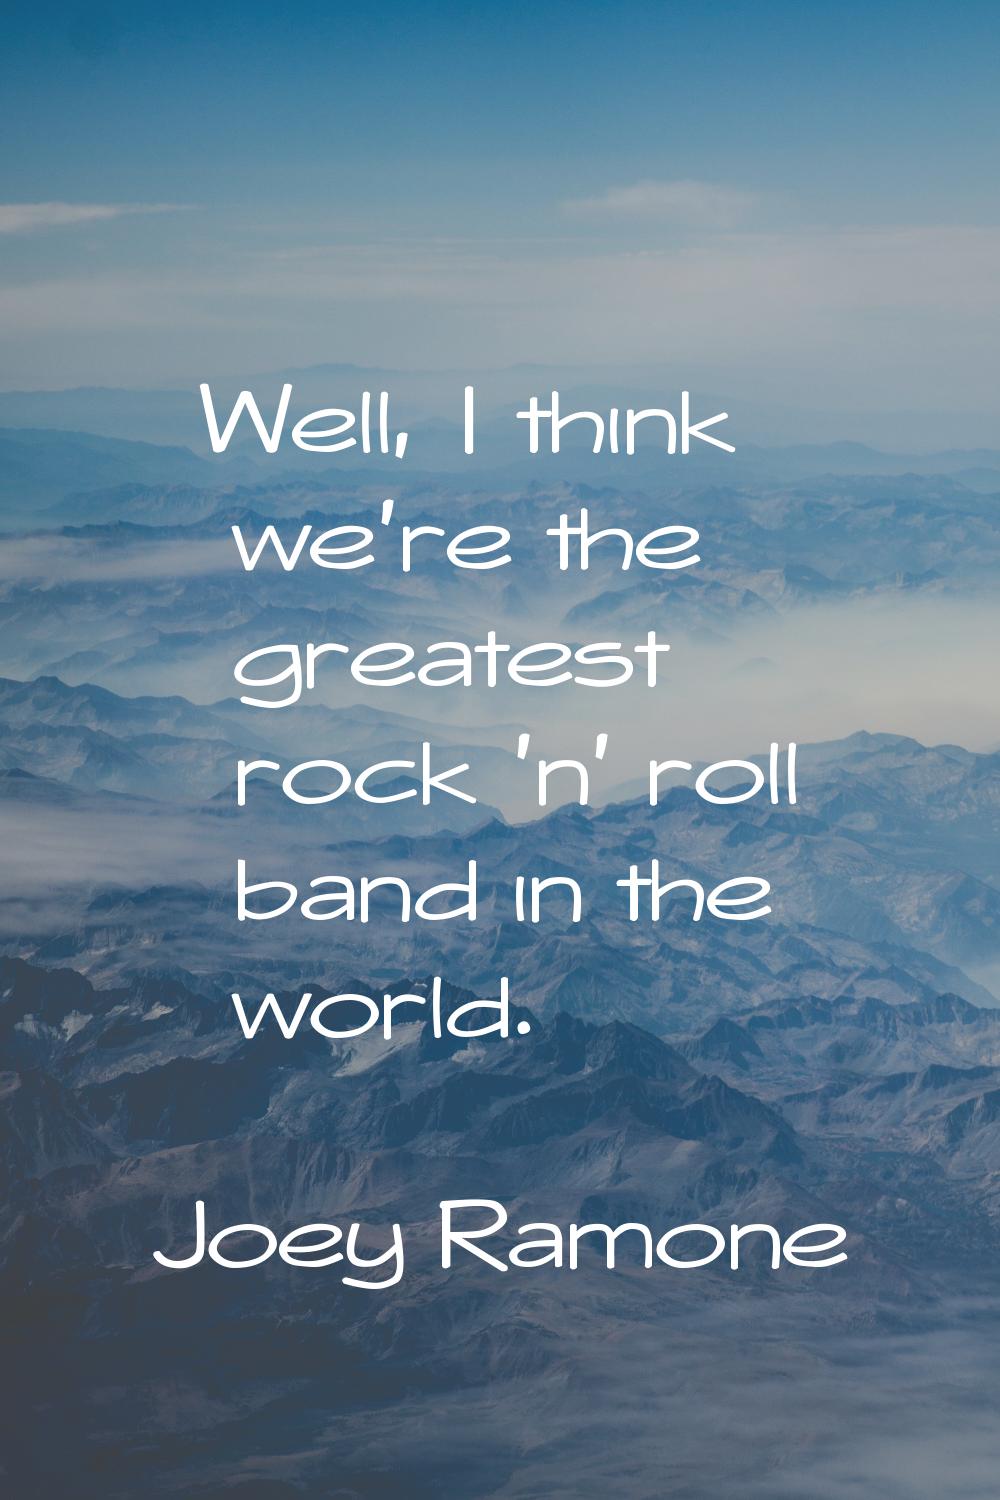 Well, I think we're the greatest rock 'n' roll band in the world.